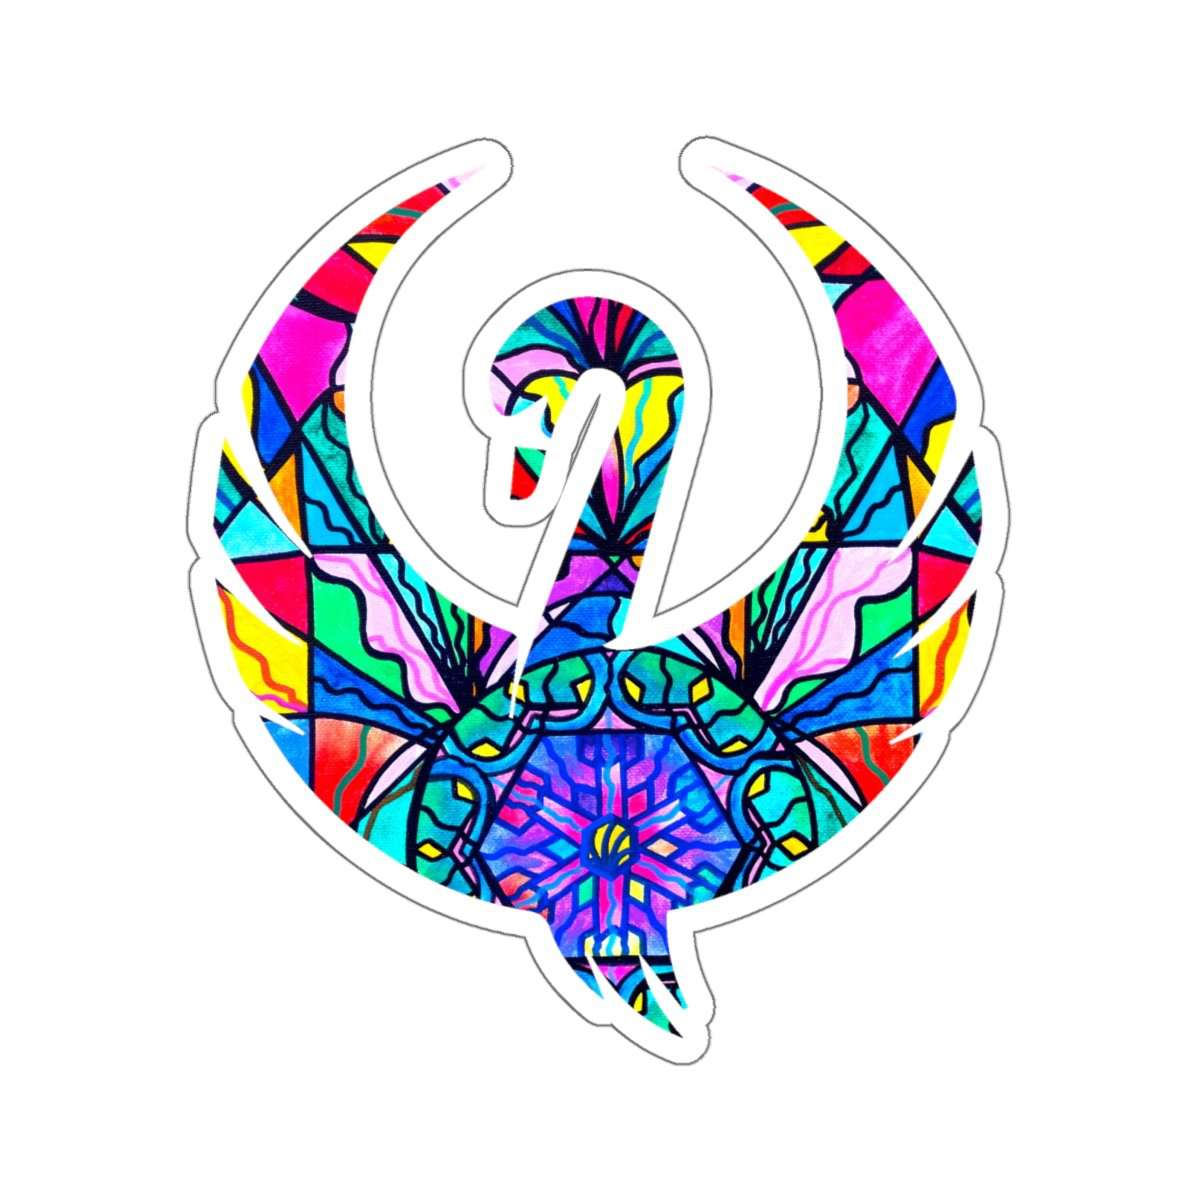 be-the-first-to-own-the-newest-anahata-heart-chakra-swan-stickers-supply_5.jpg